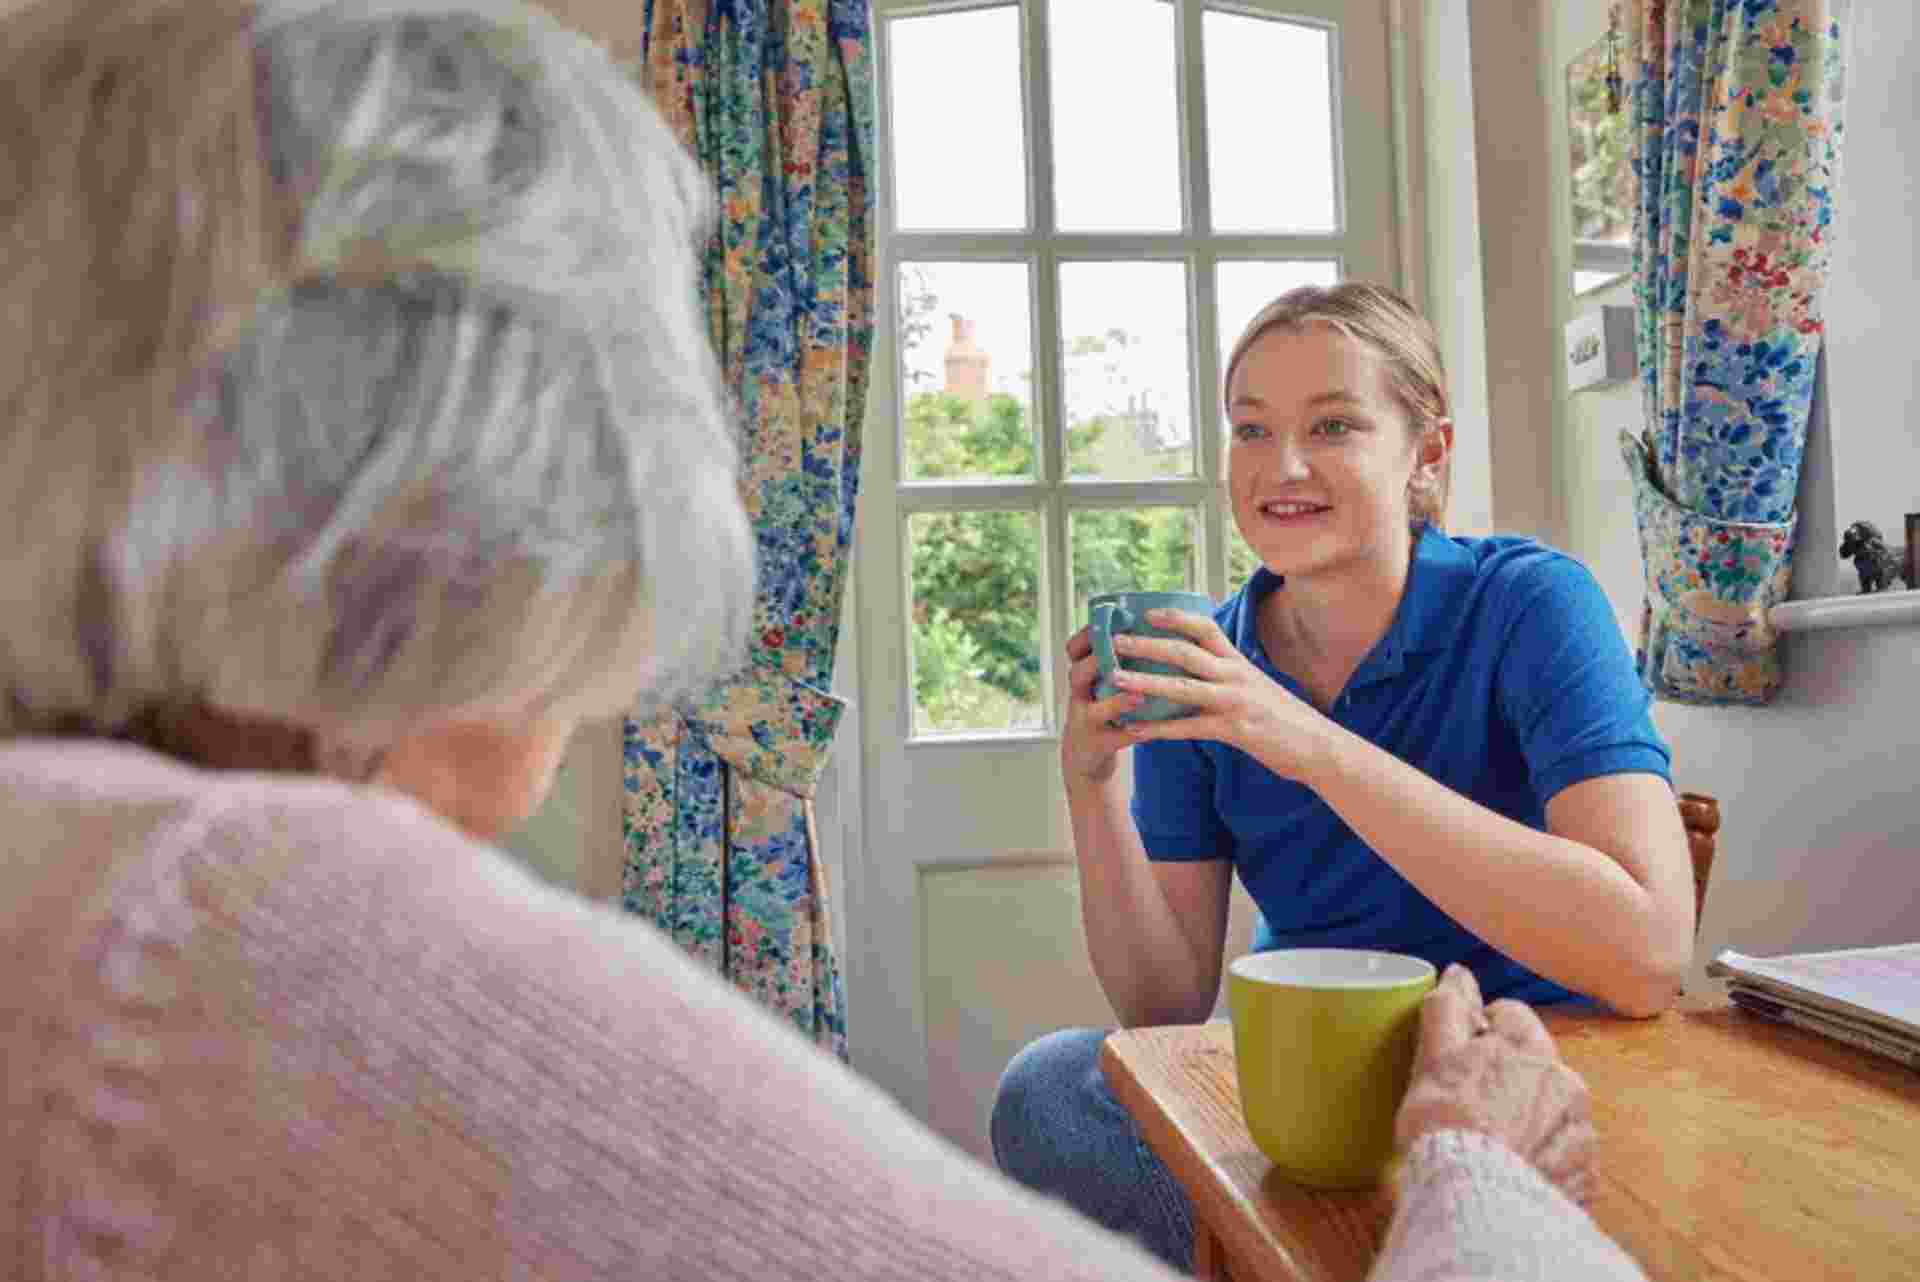 Can social care providers offer more flexibility for staff?